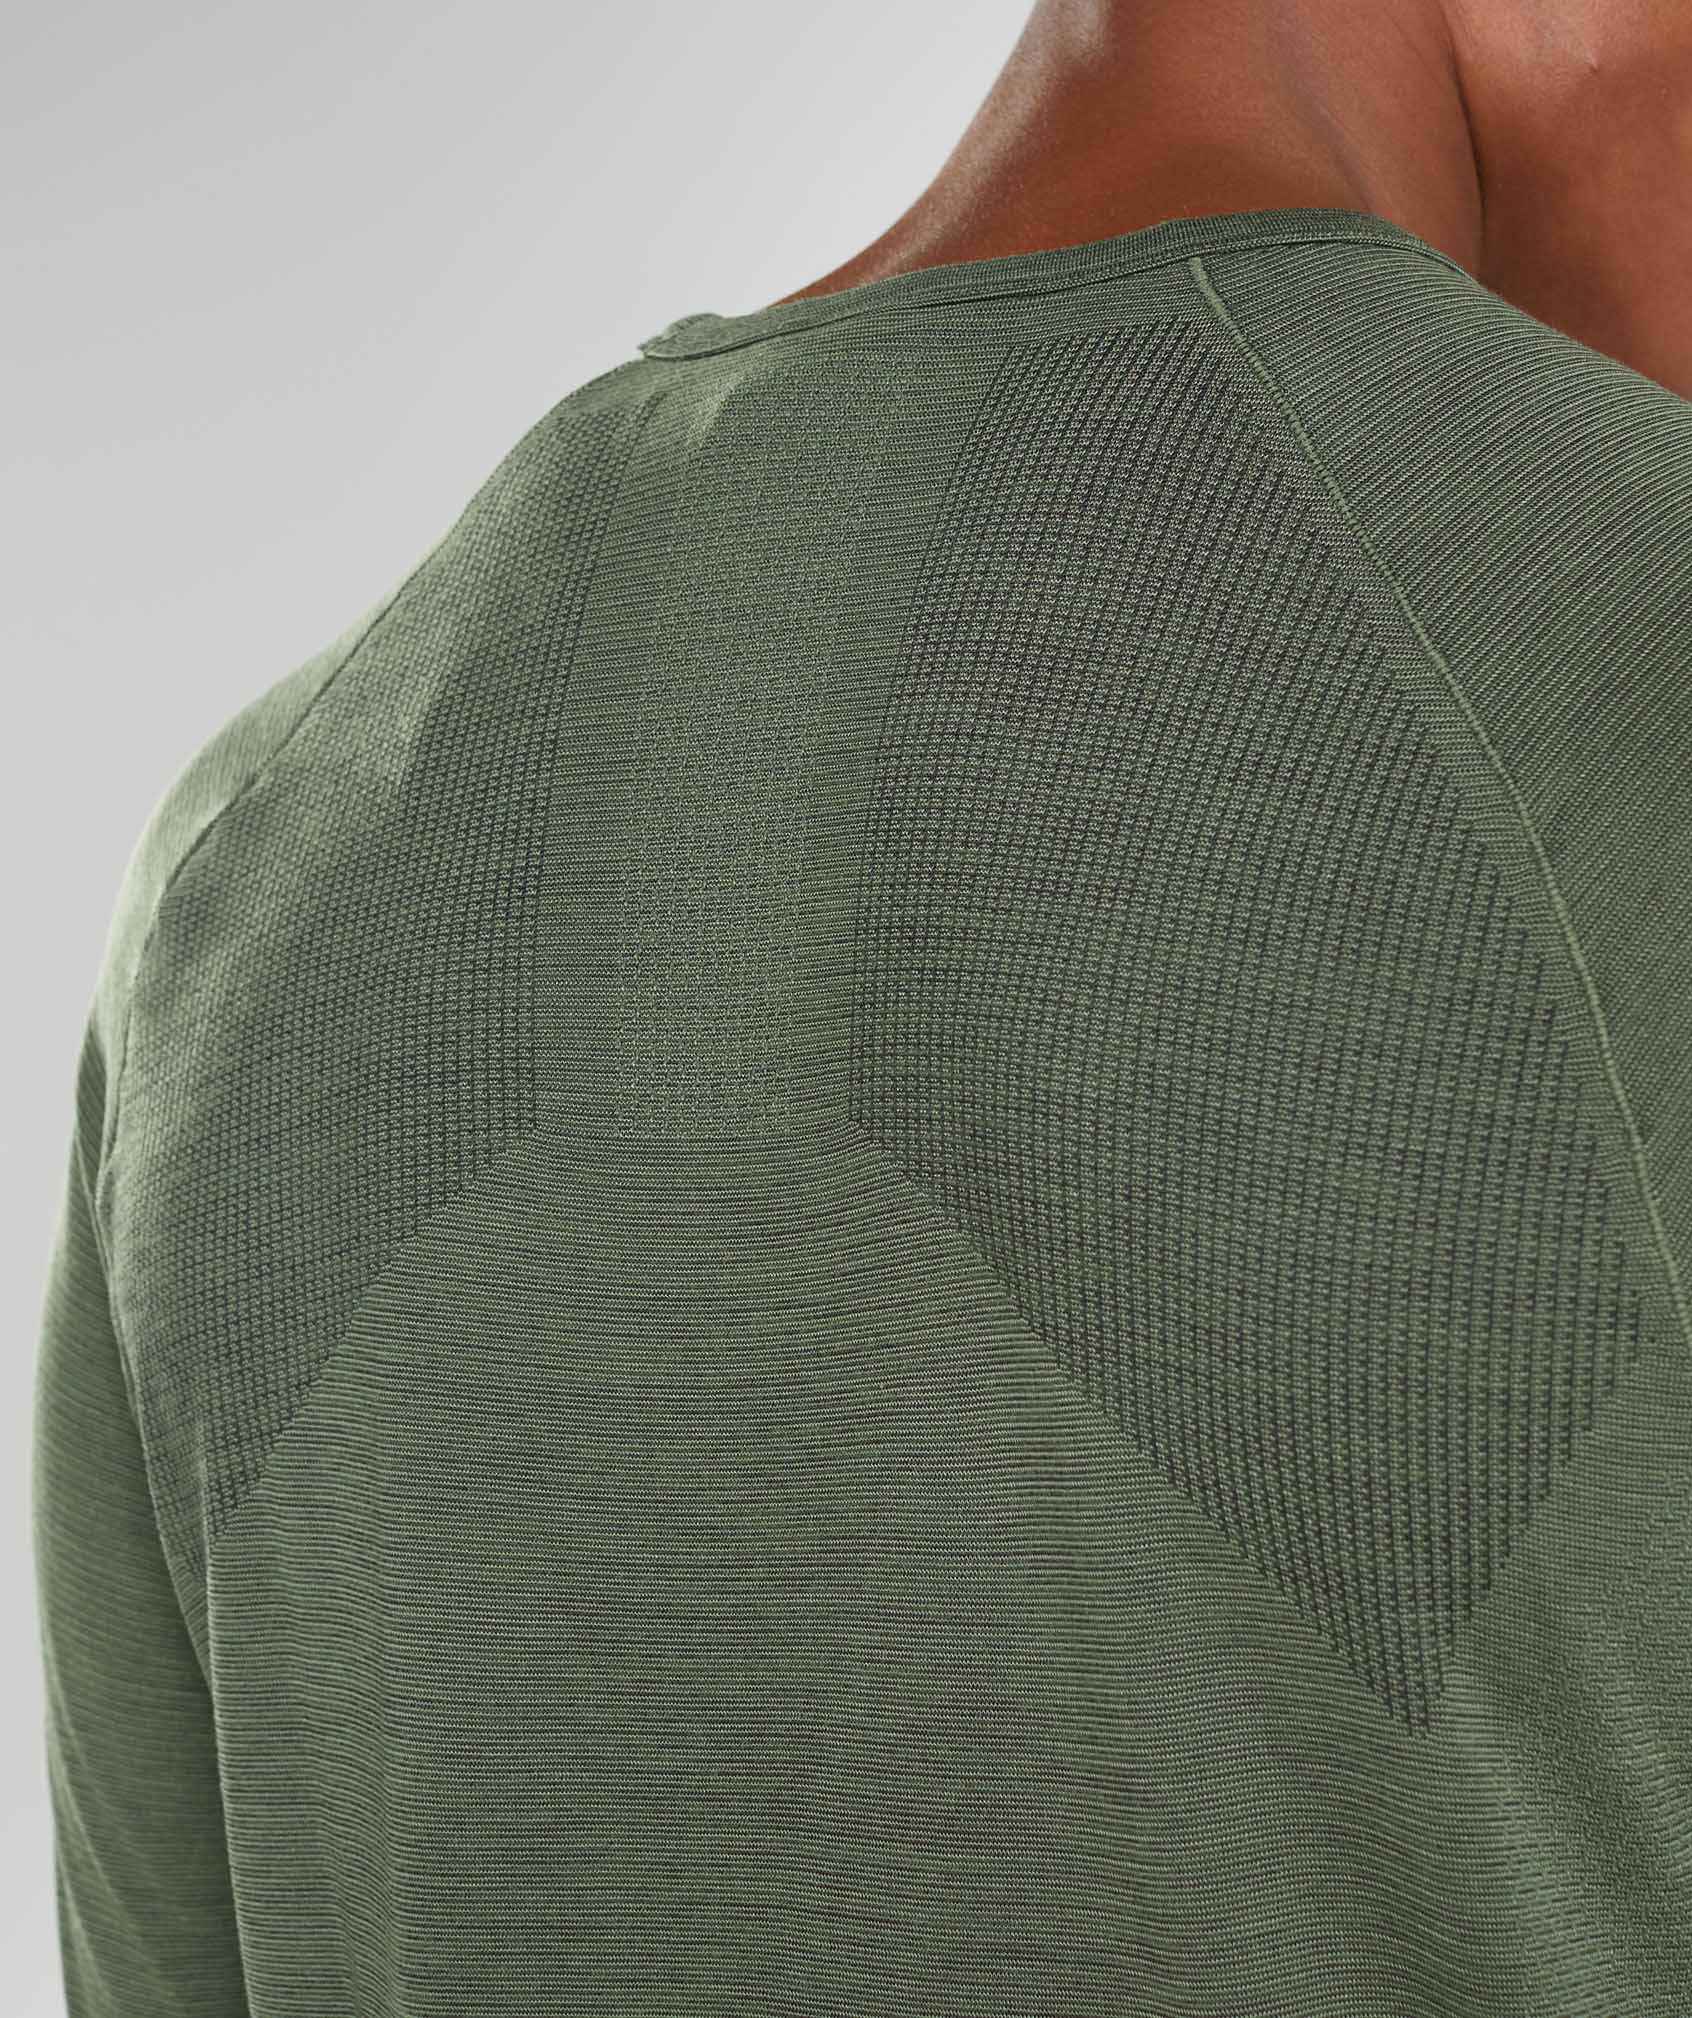 Retake Seamless Long Sleeve T-Shirt in Core Olive - view 5